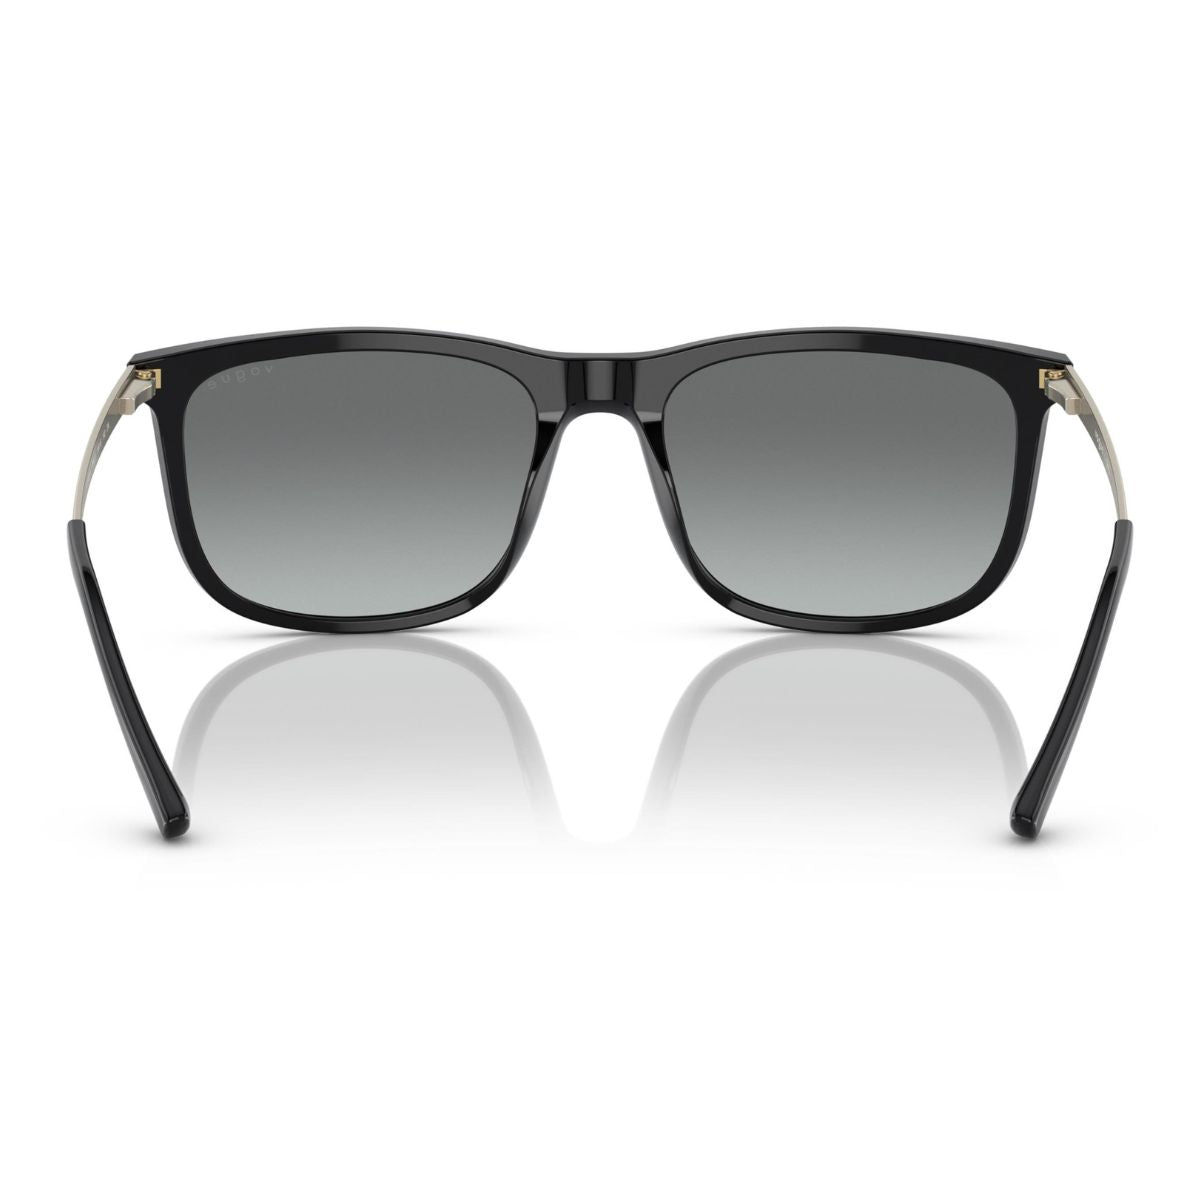 "Get the latest Vogue VO 5567 238613 black sunglasses for women with UV protection at Optorium Eyewear, free shipping."